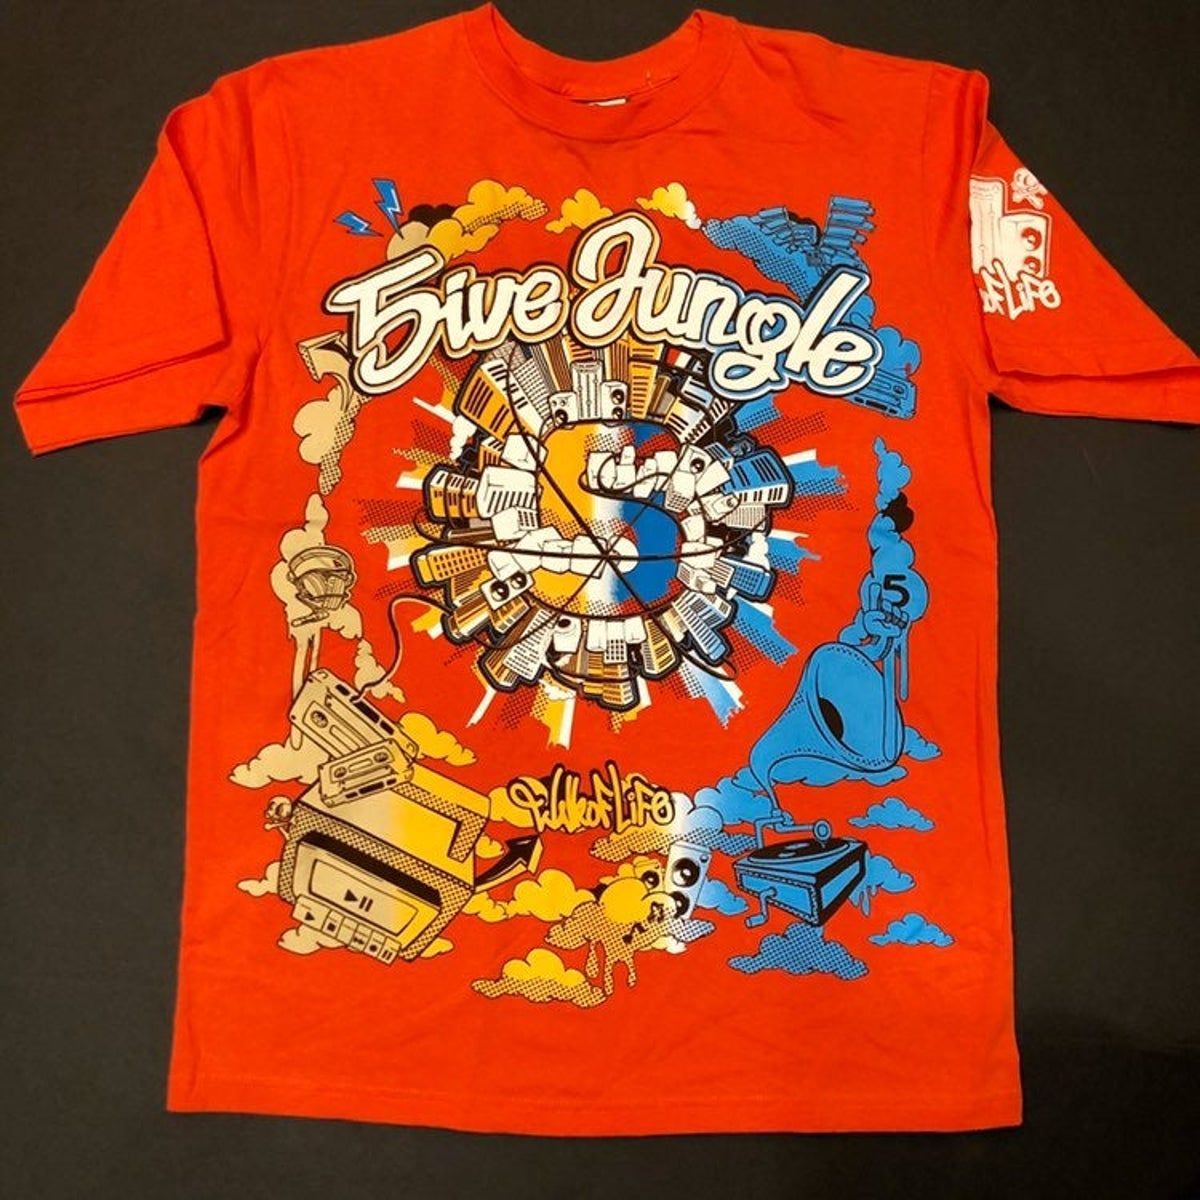 5ive Jungle Graphic T-Shirt